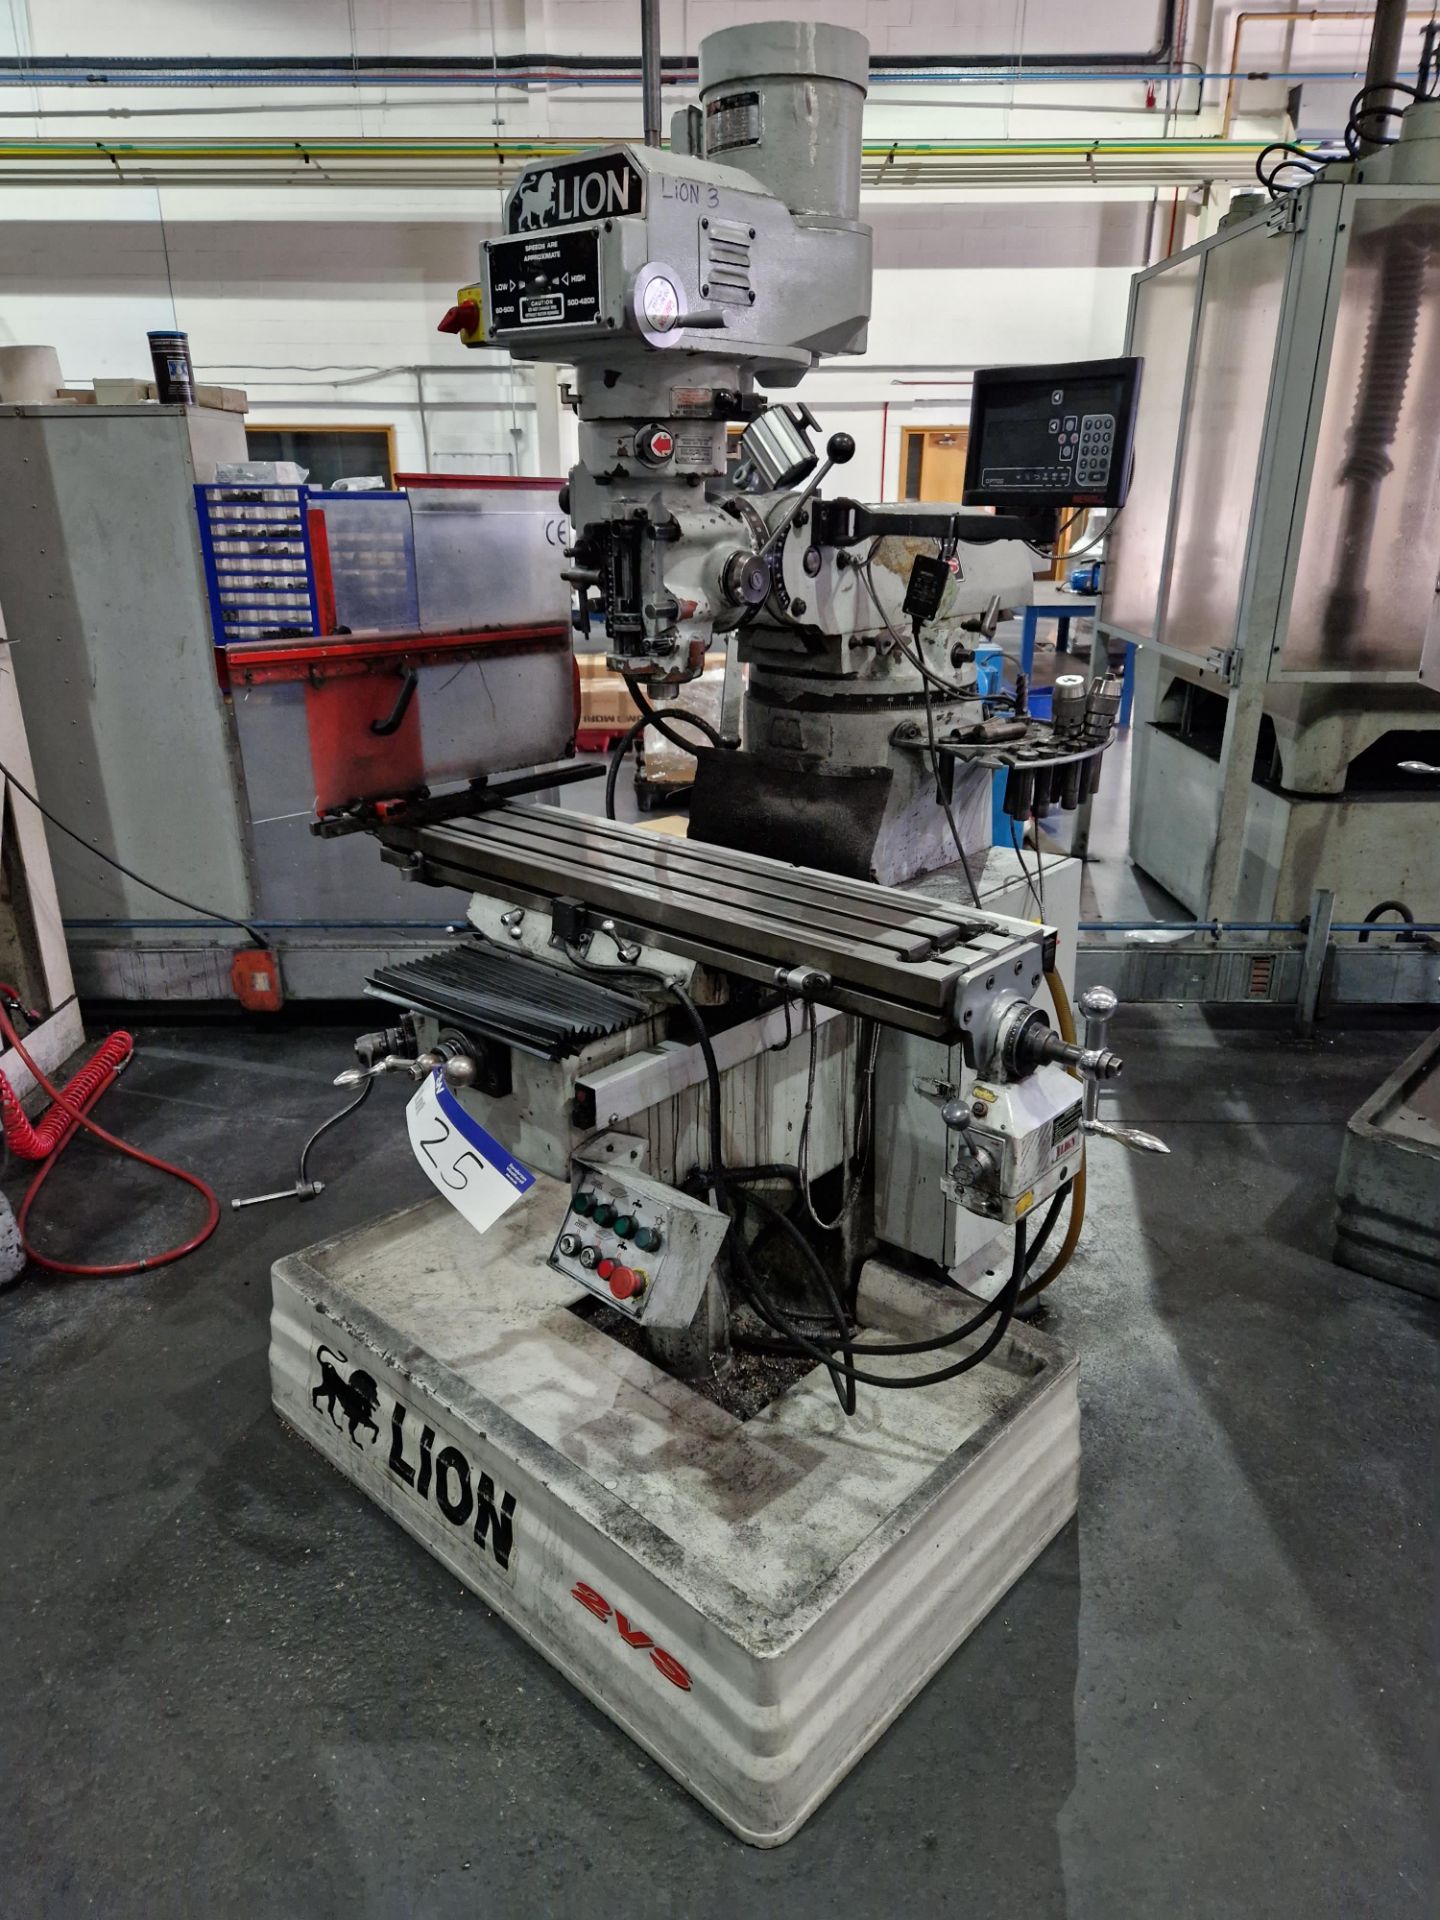 LION 2VS Universal Head Milling Machine with NEWALL DP 700 Digital Read Out, c/w 2 Tool Holders